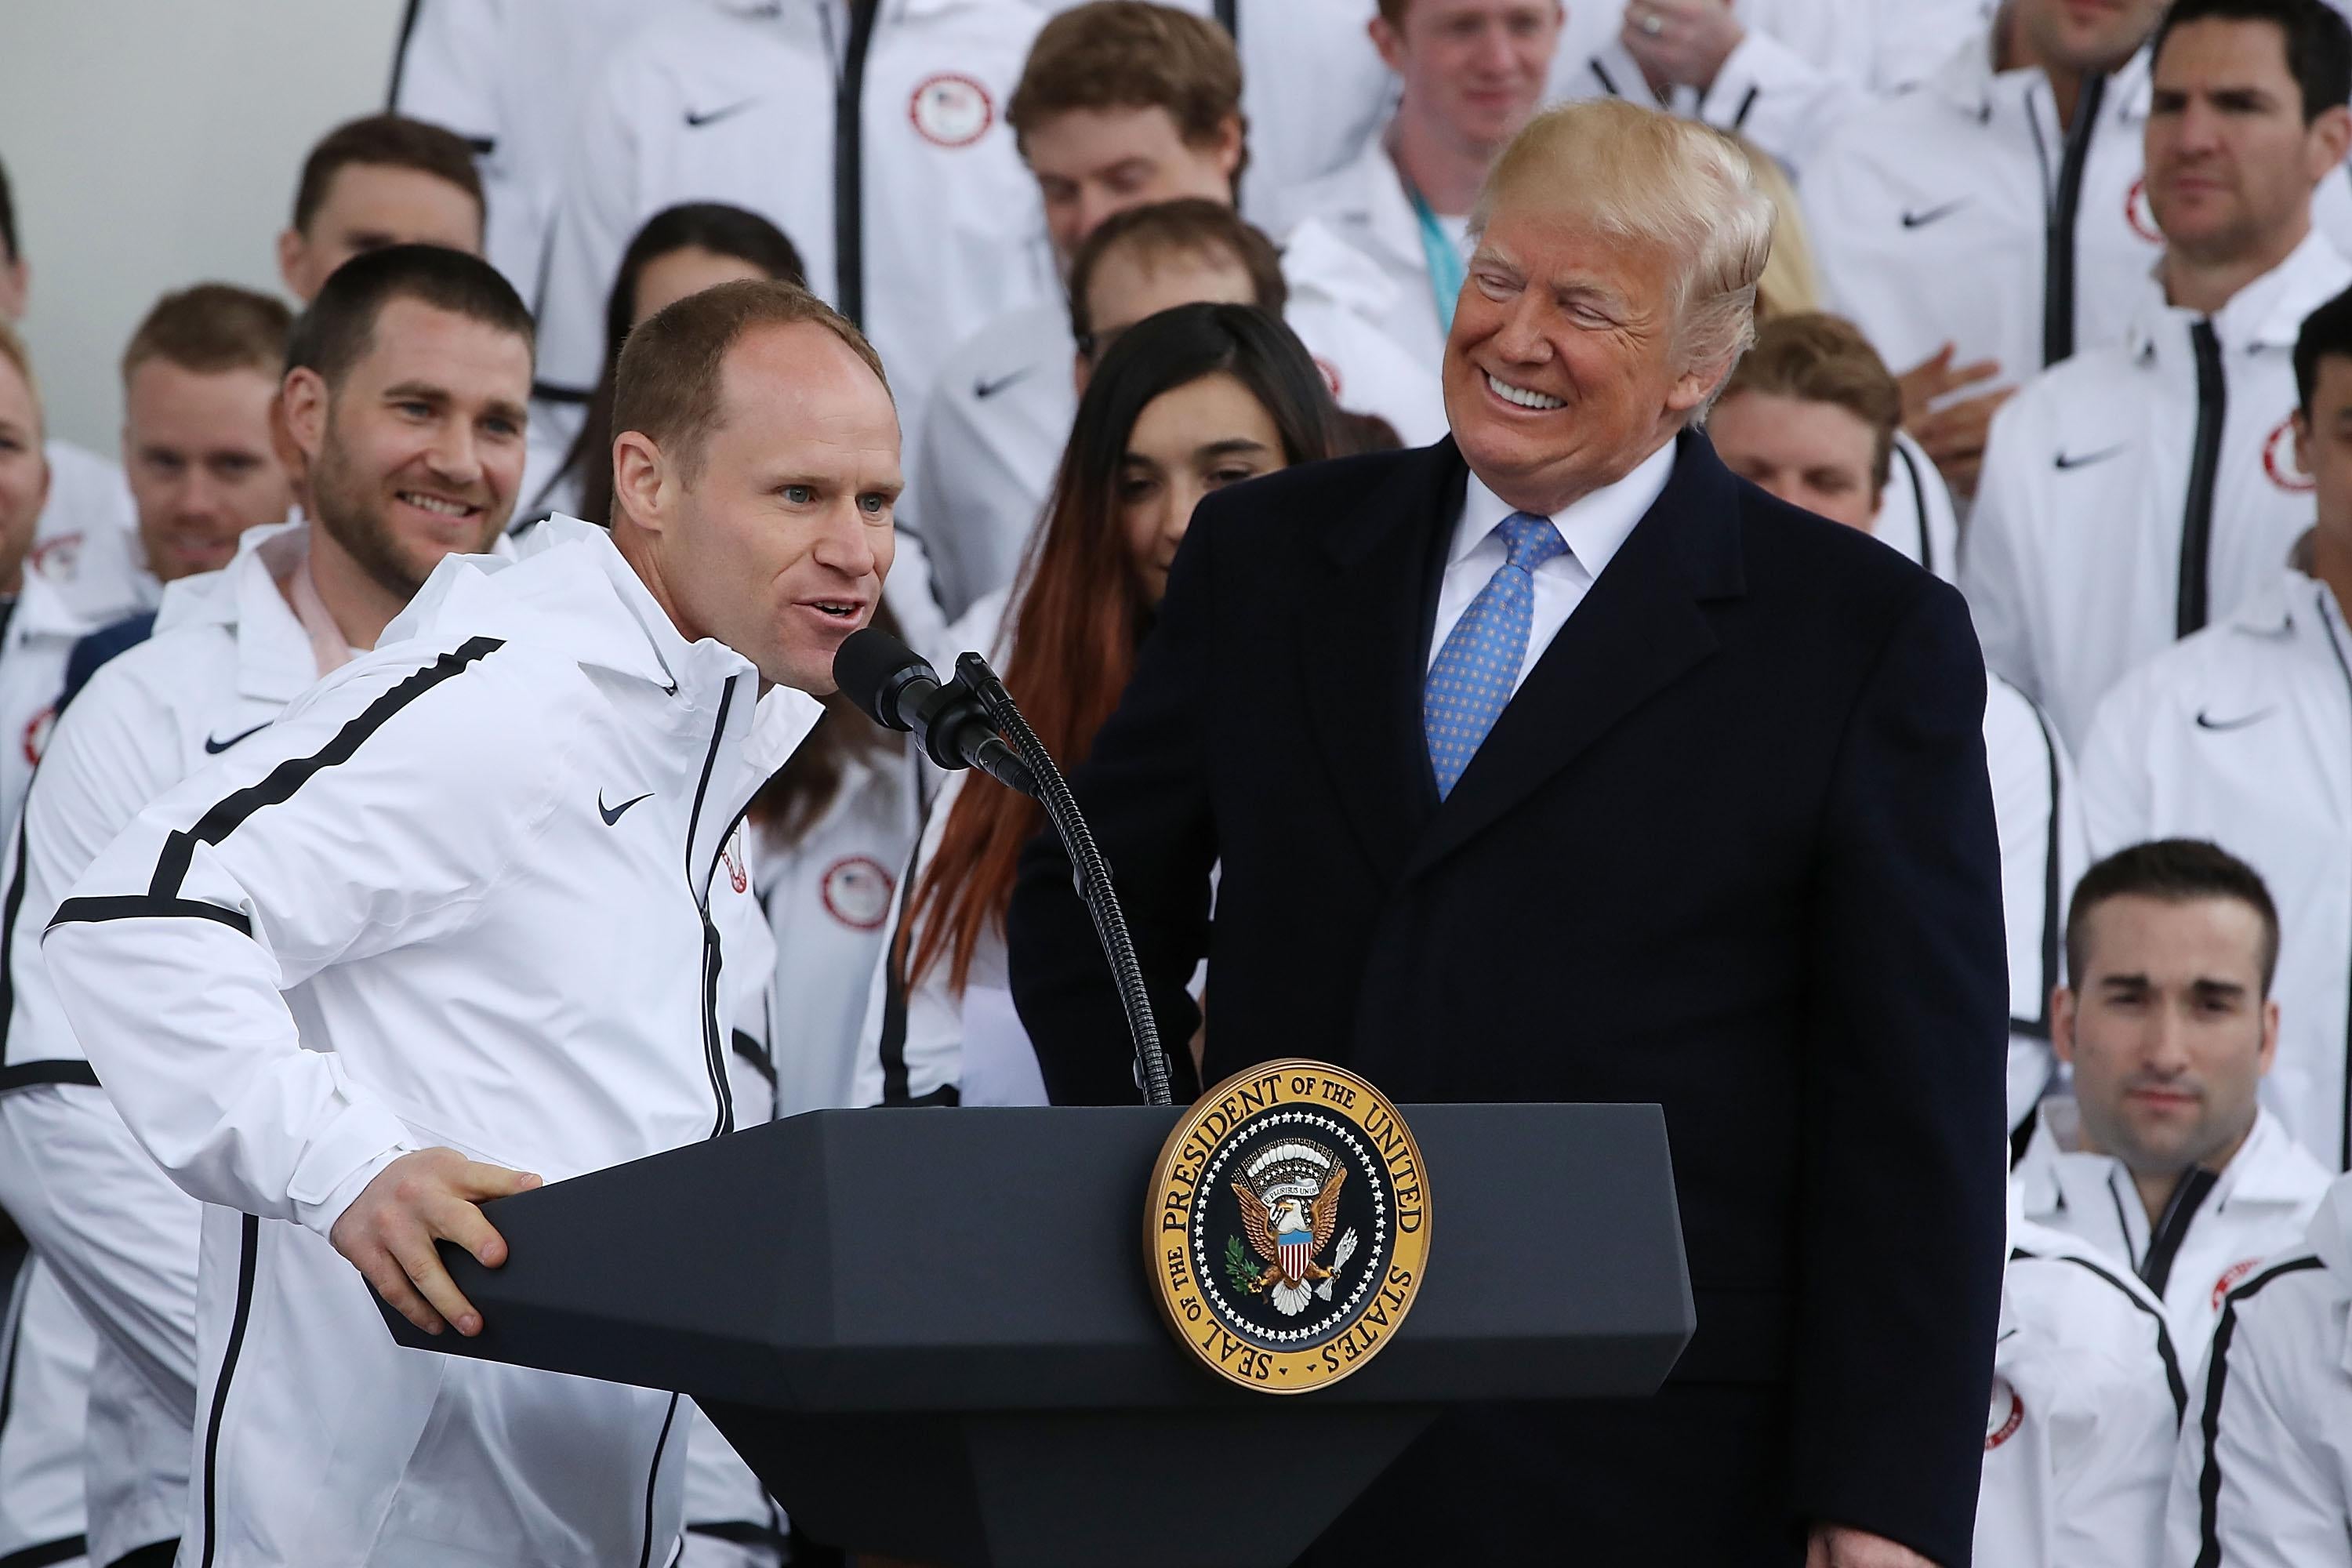 Paralympic medalist skiier Dan Cnossen speaks as President Donald Trump looks on during a celebration of the USA 2018 Winter Olympic and Paralympic Teams on the North Portico of the White House on April 27, 2018 in Washington, D.C. 